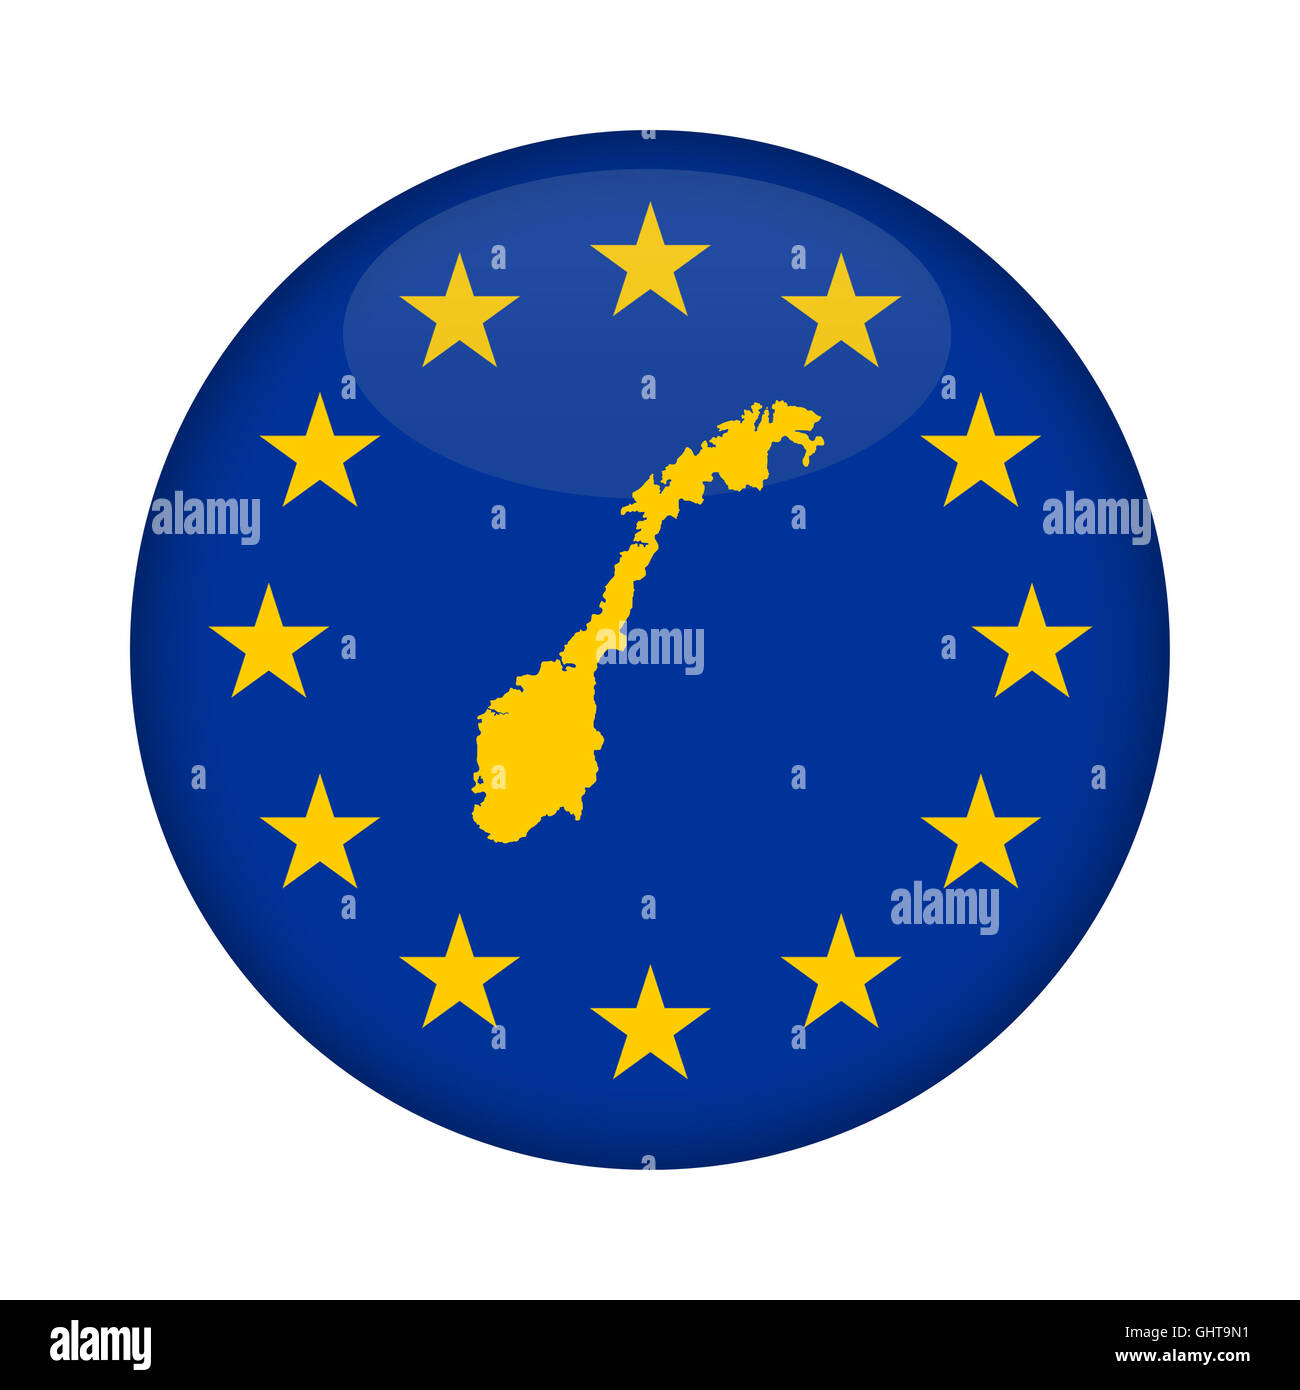 Norway map on a European Union flag button isolated on a white background. Stock Photo